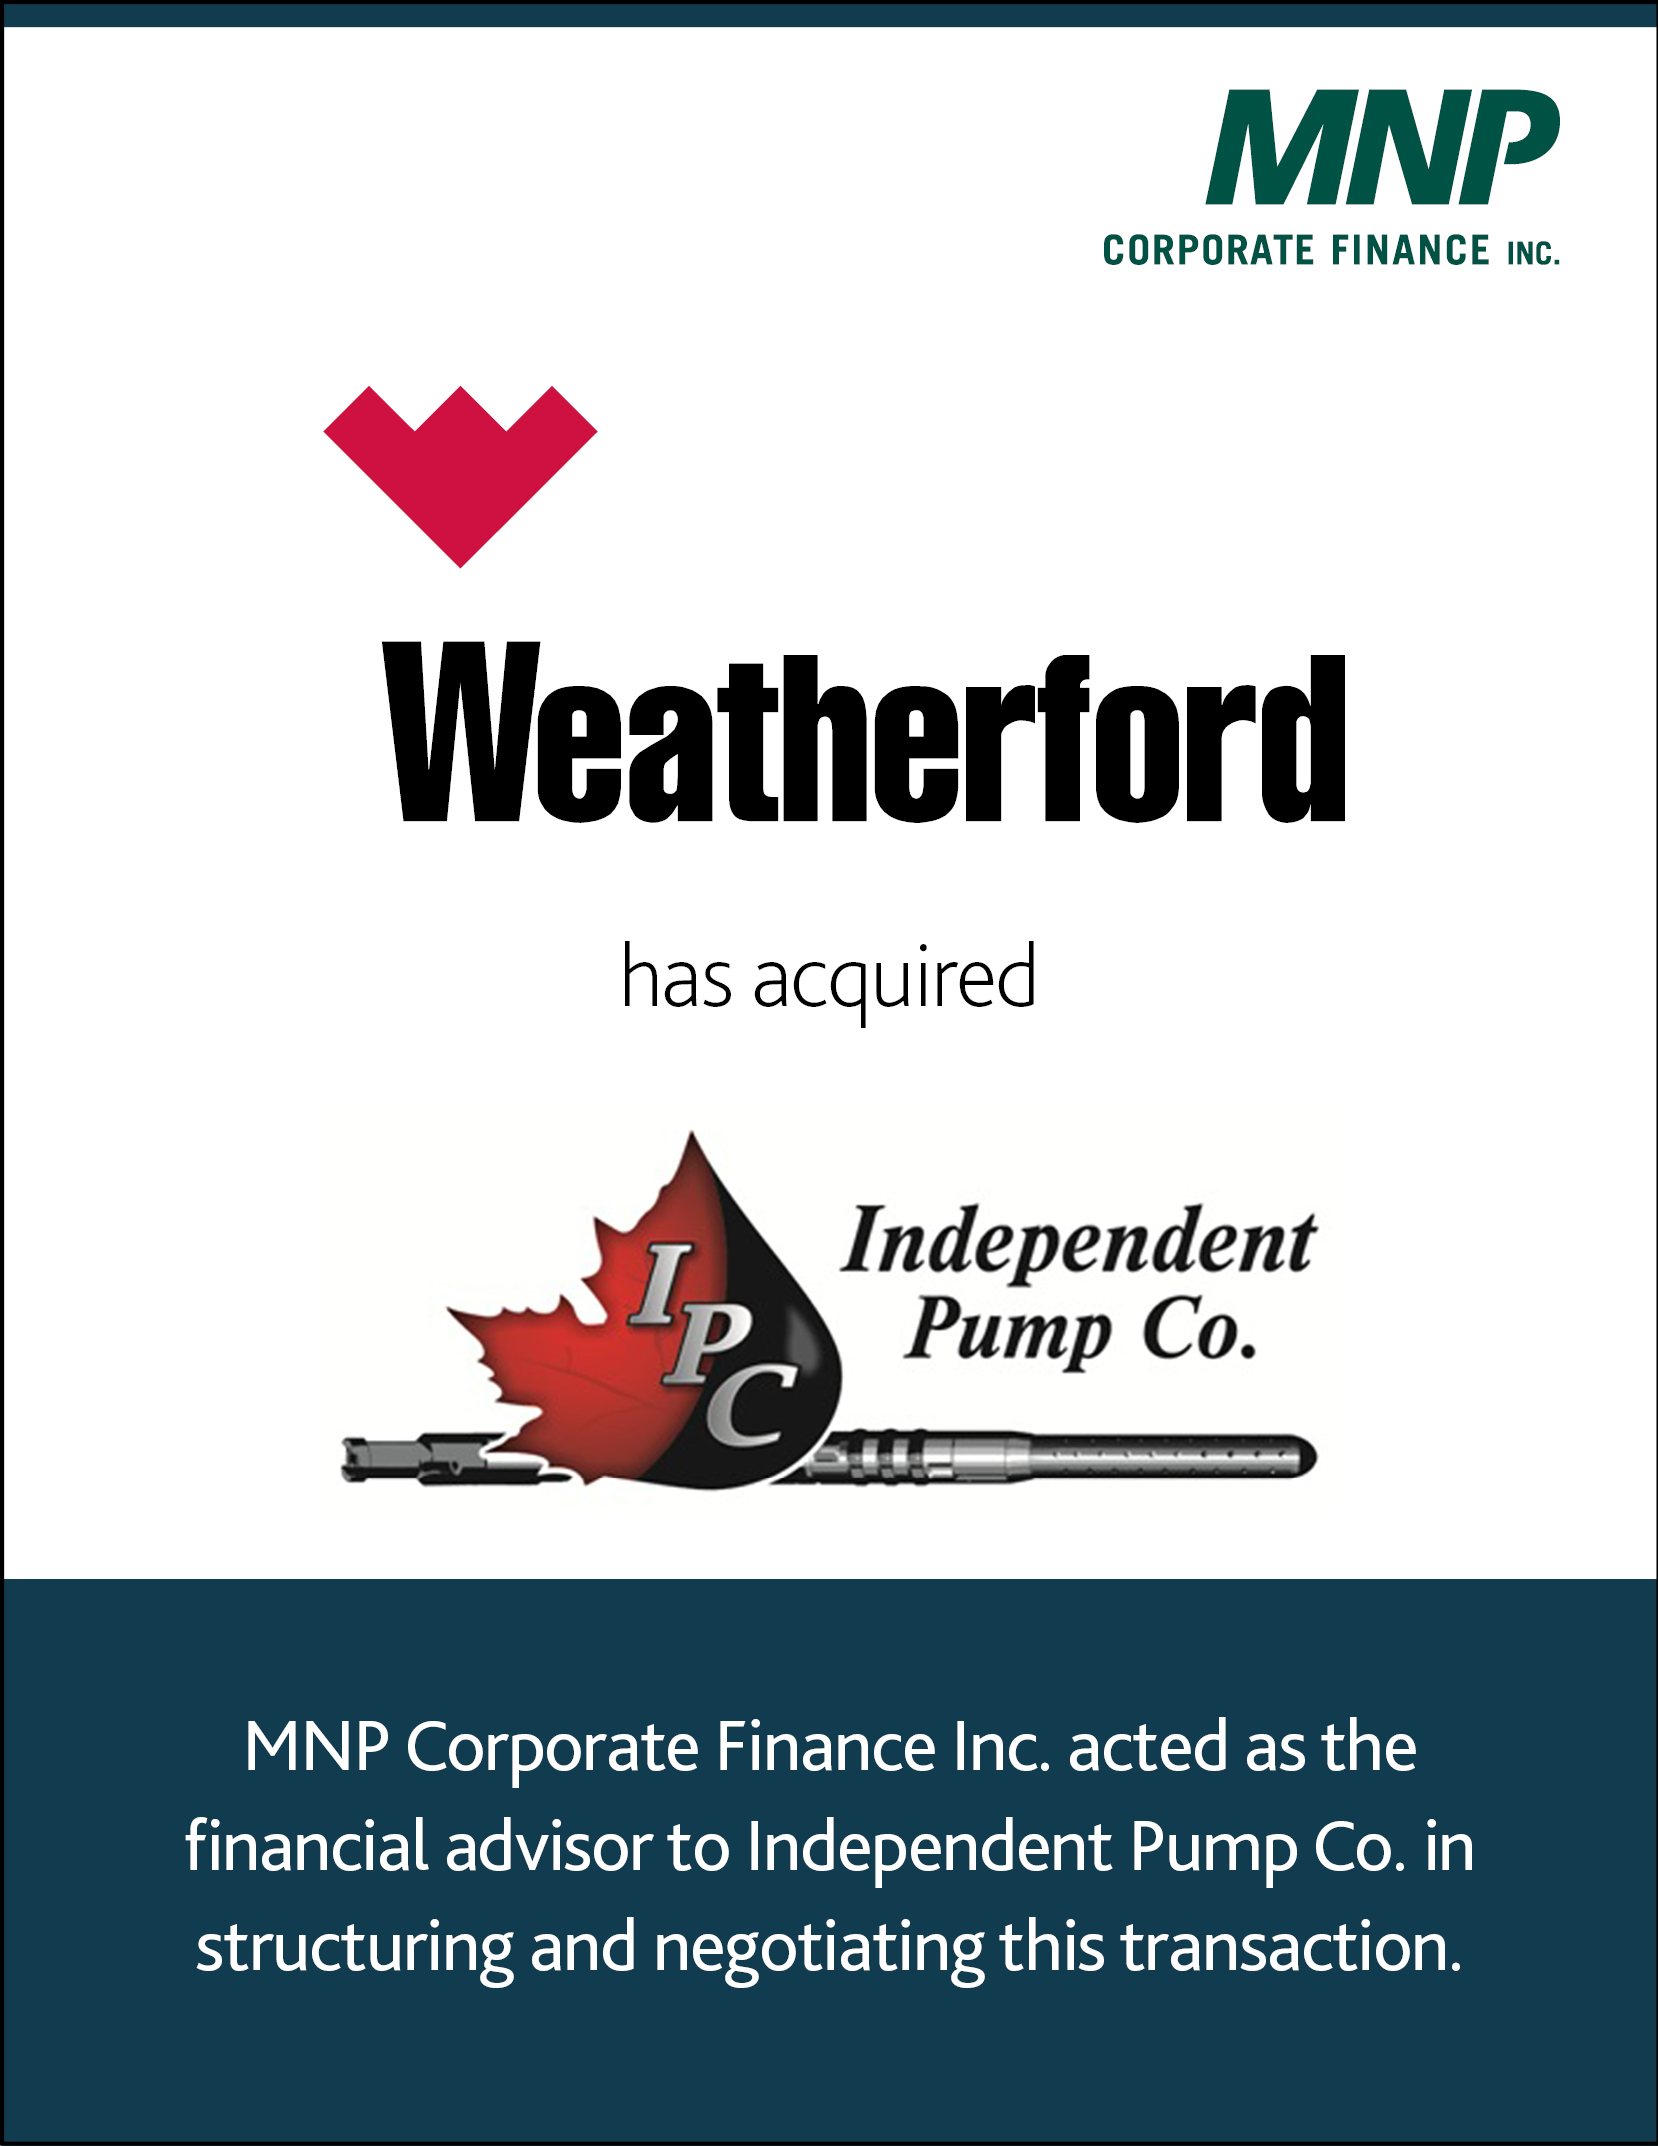 Weatherford has acquired Independent Pump Co.